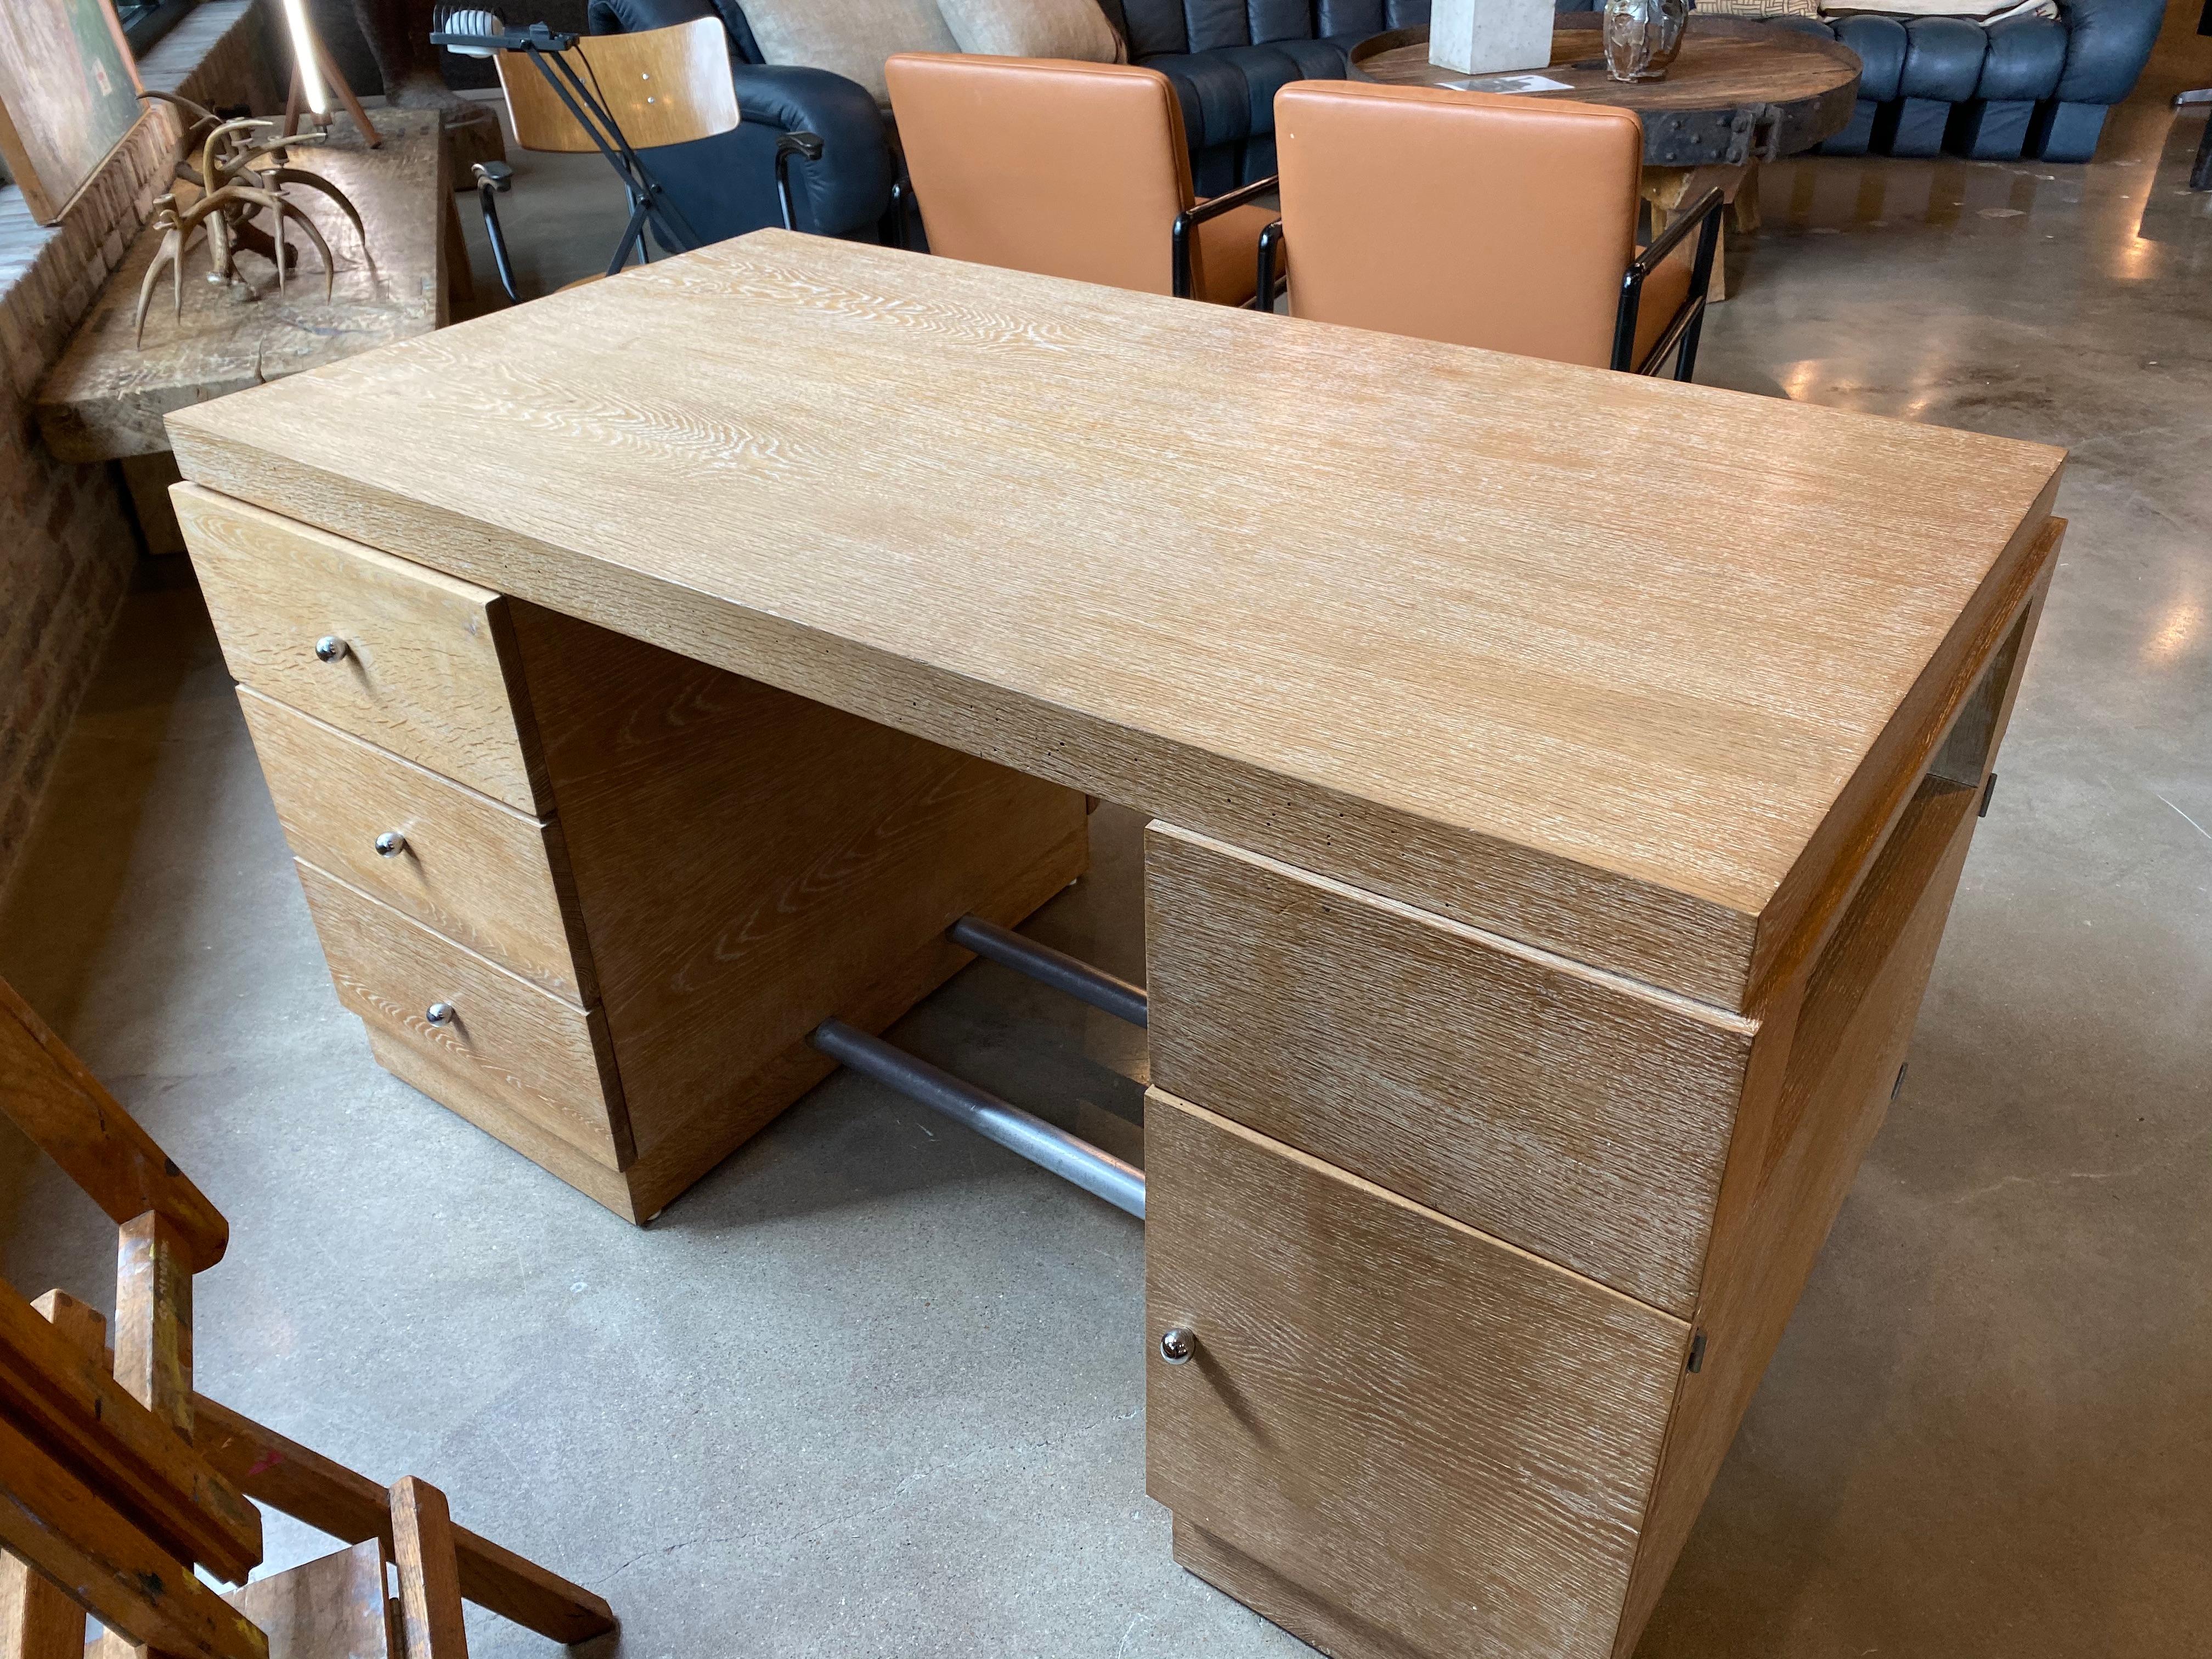 Partners desk of French white oak with cerused finish. Cabinetry on both sides with ample storage, it can be floated in a room. Plated metal rods create foot rests at base. Well constructed and heavy. Late Art Deco or early Mid-Century Modern